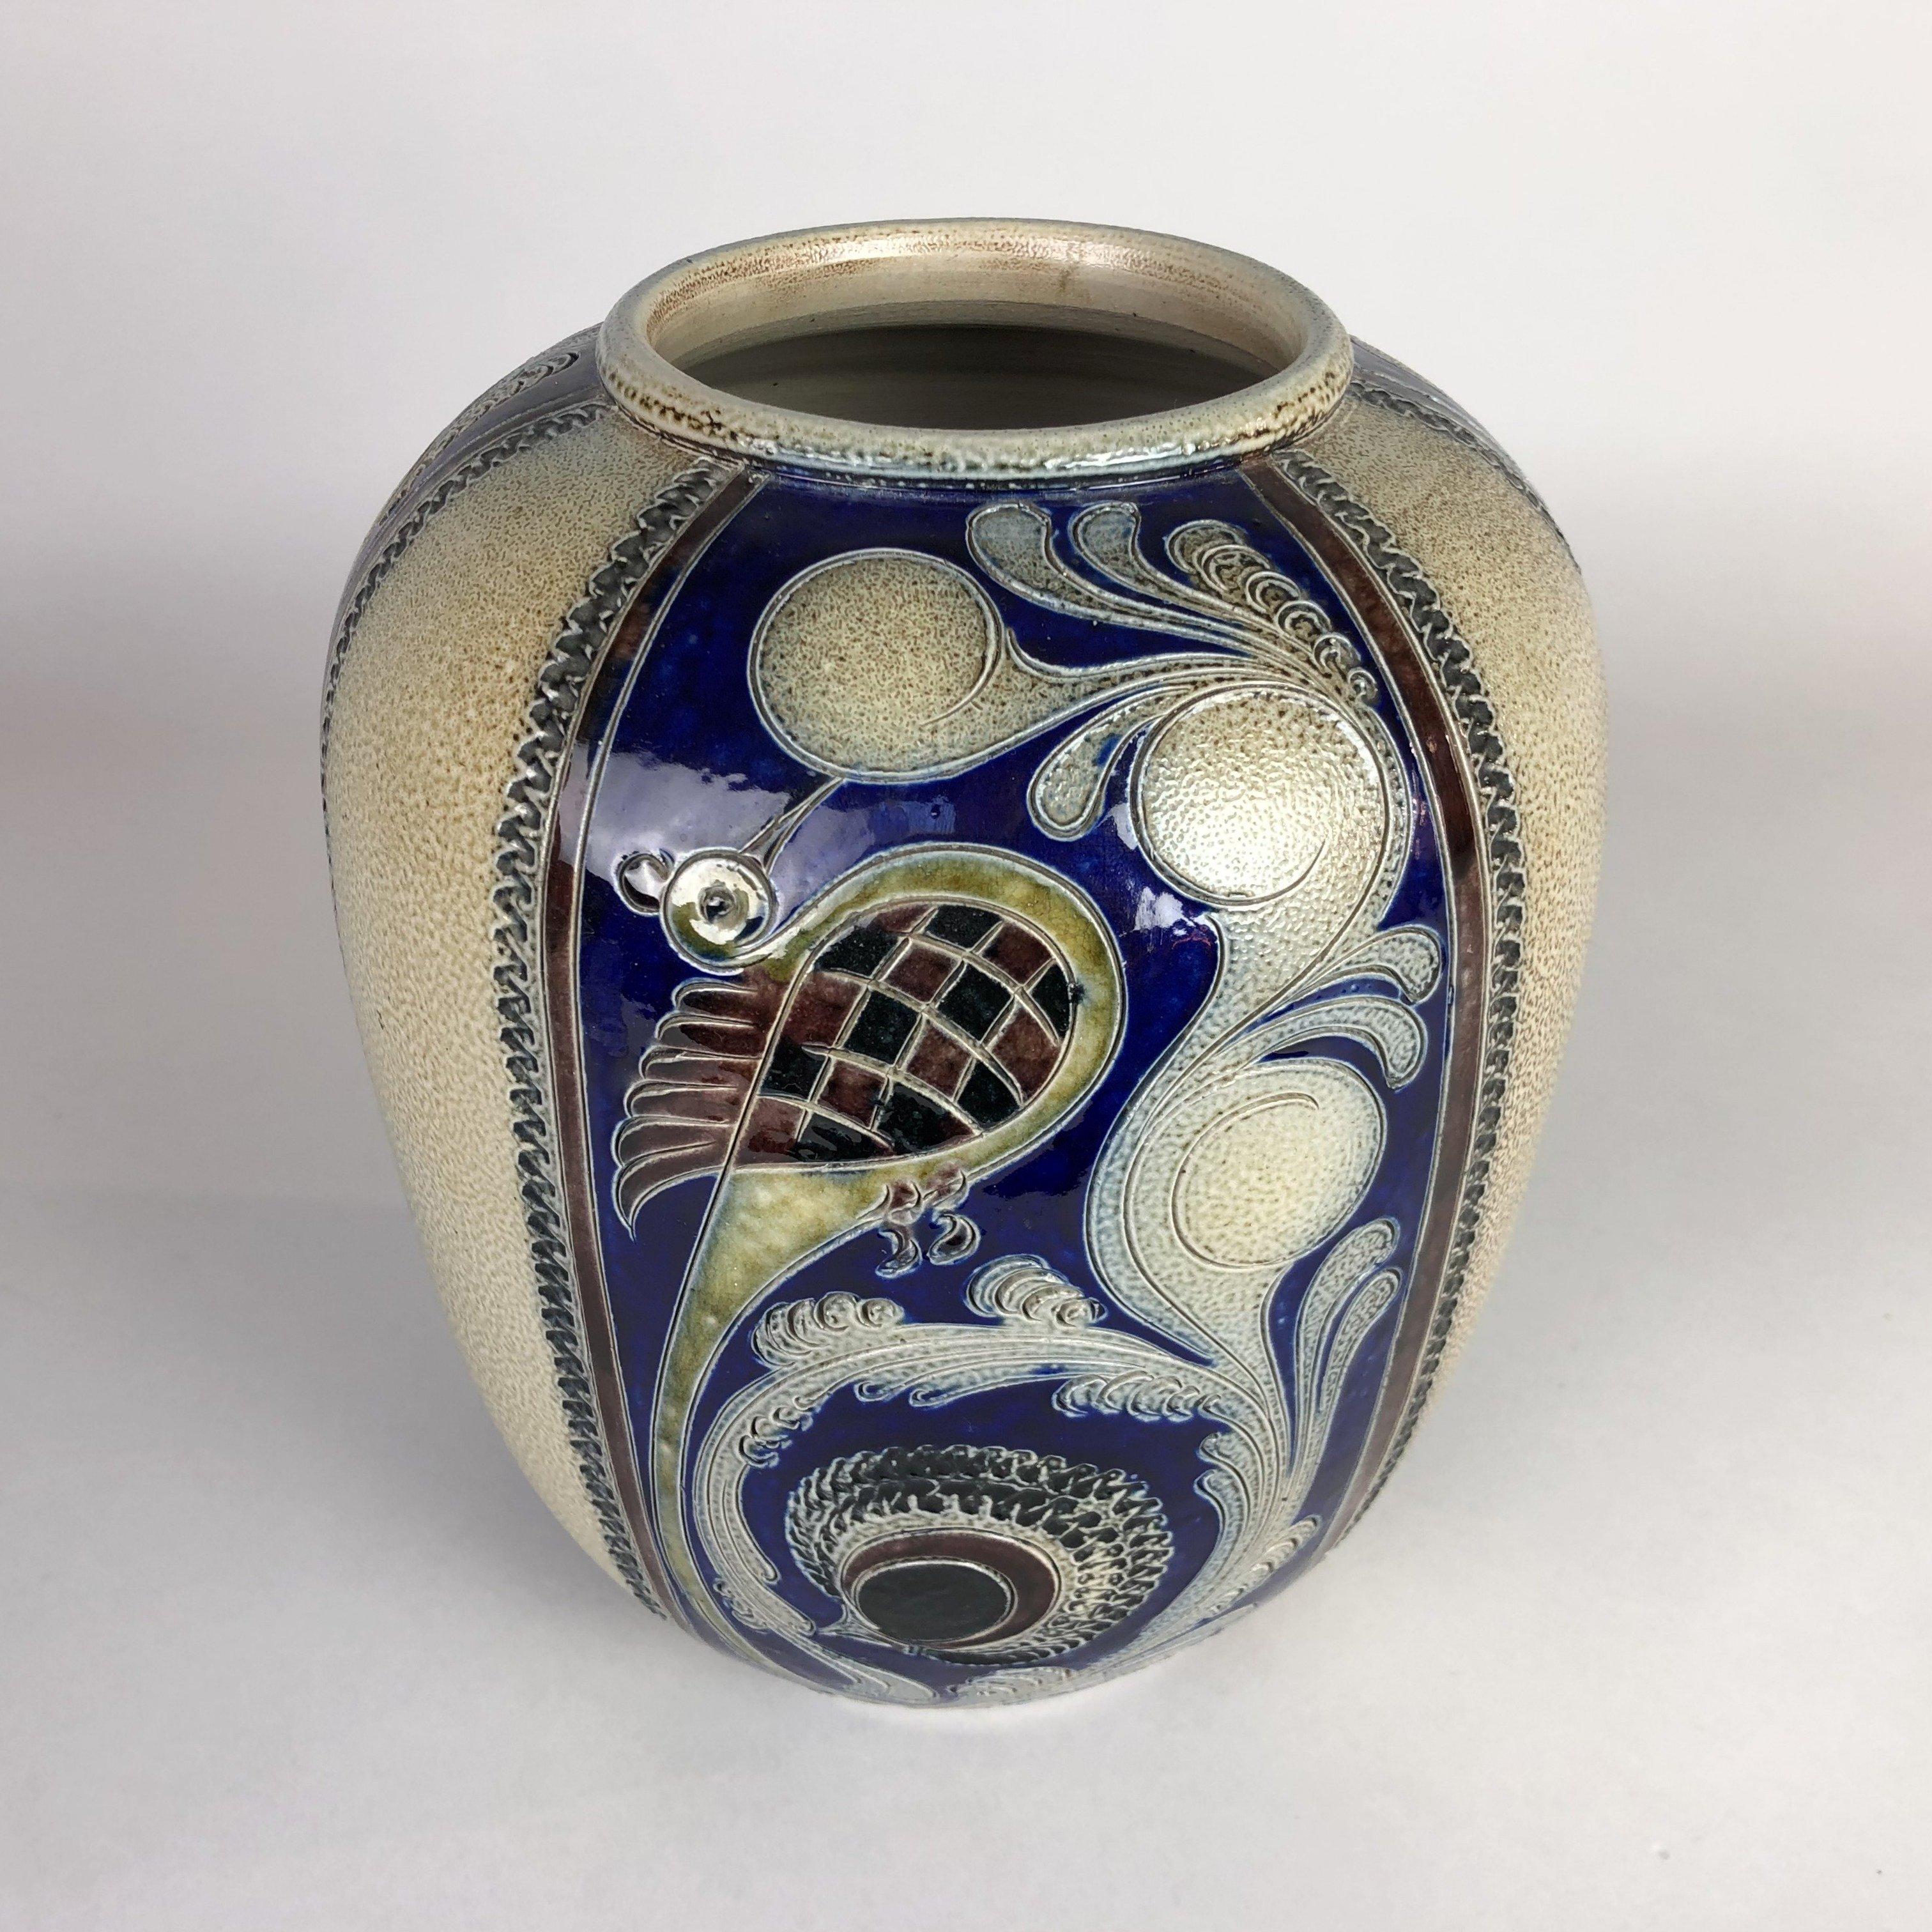 Very nice and interesting vintage ceramic vase with a peacock depicted.